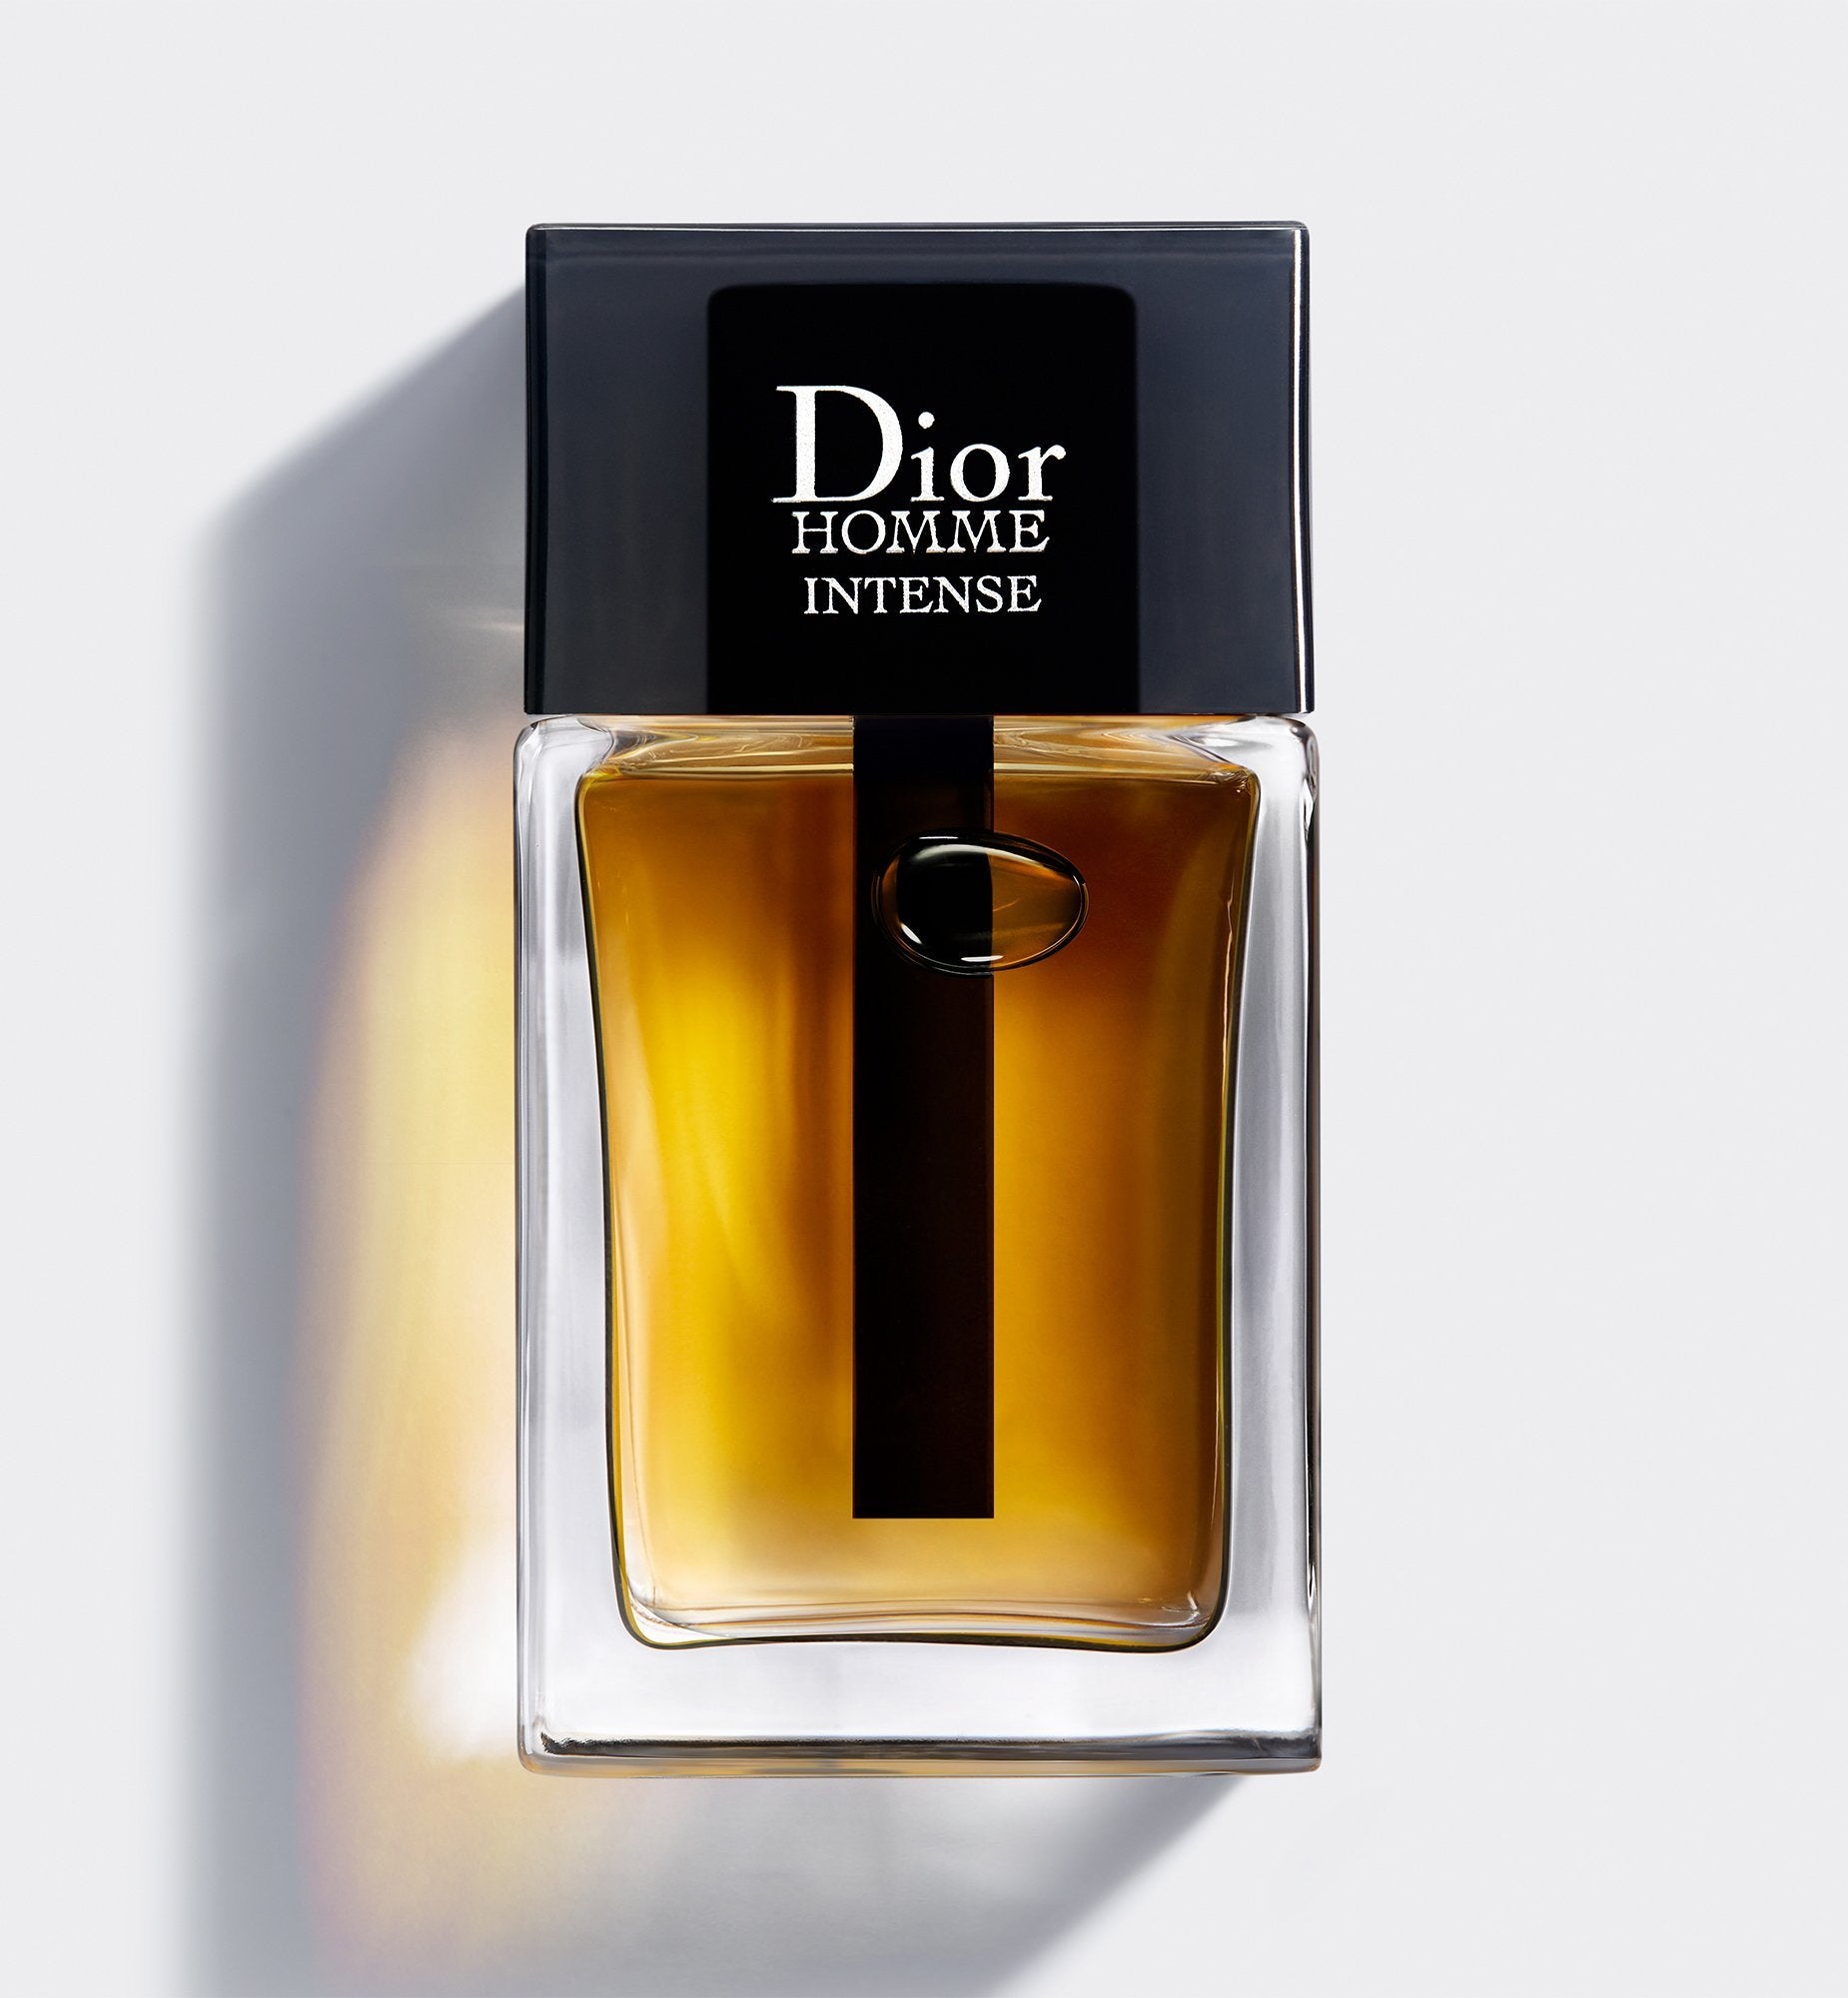 DIOR HOMME INTENSE – Dior Beauty South 